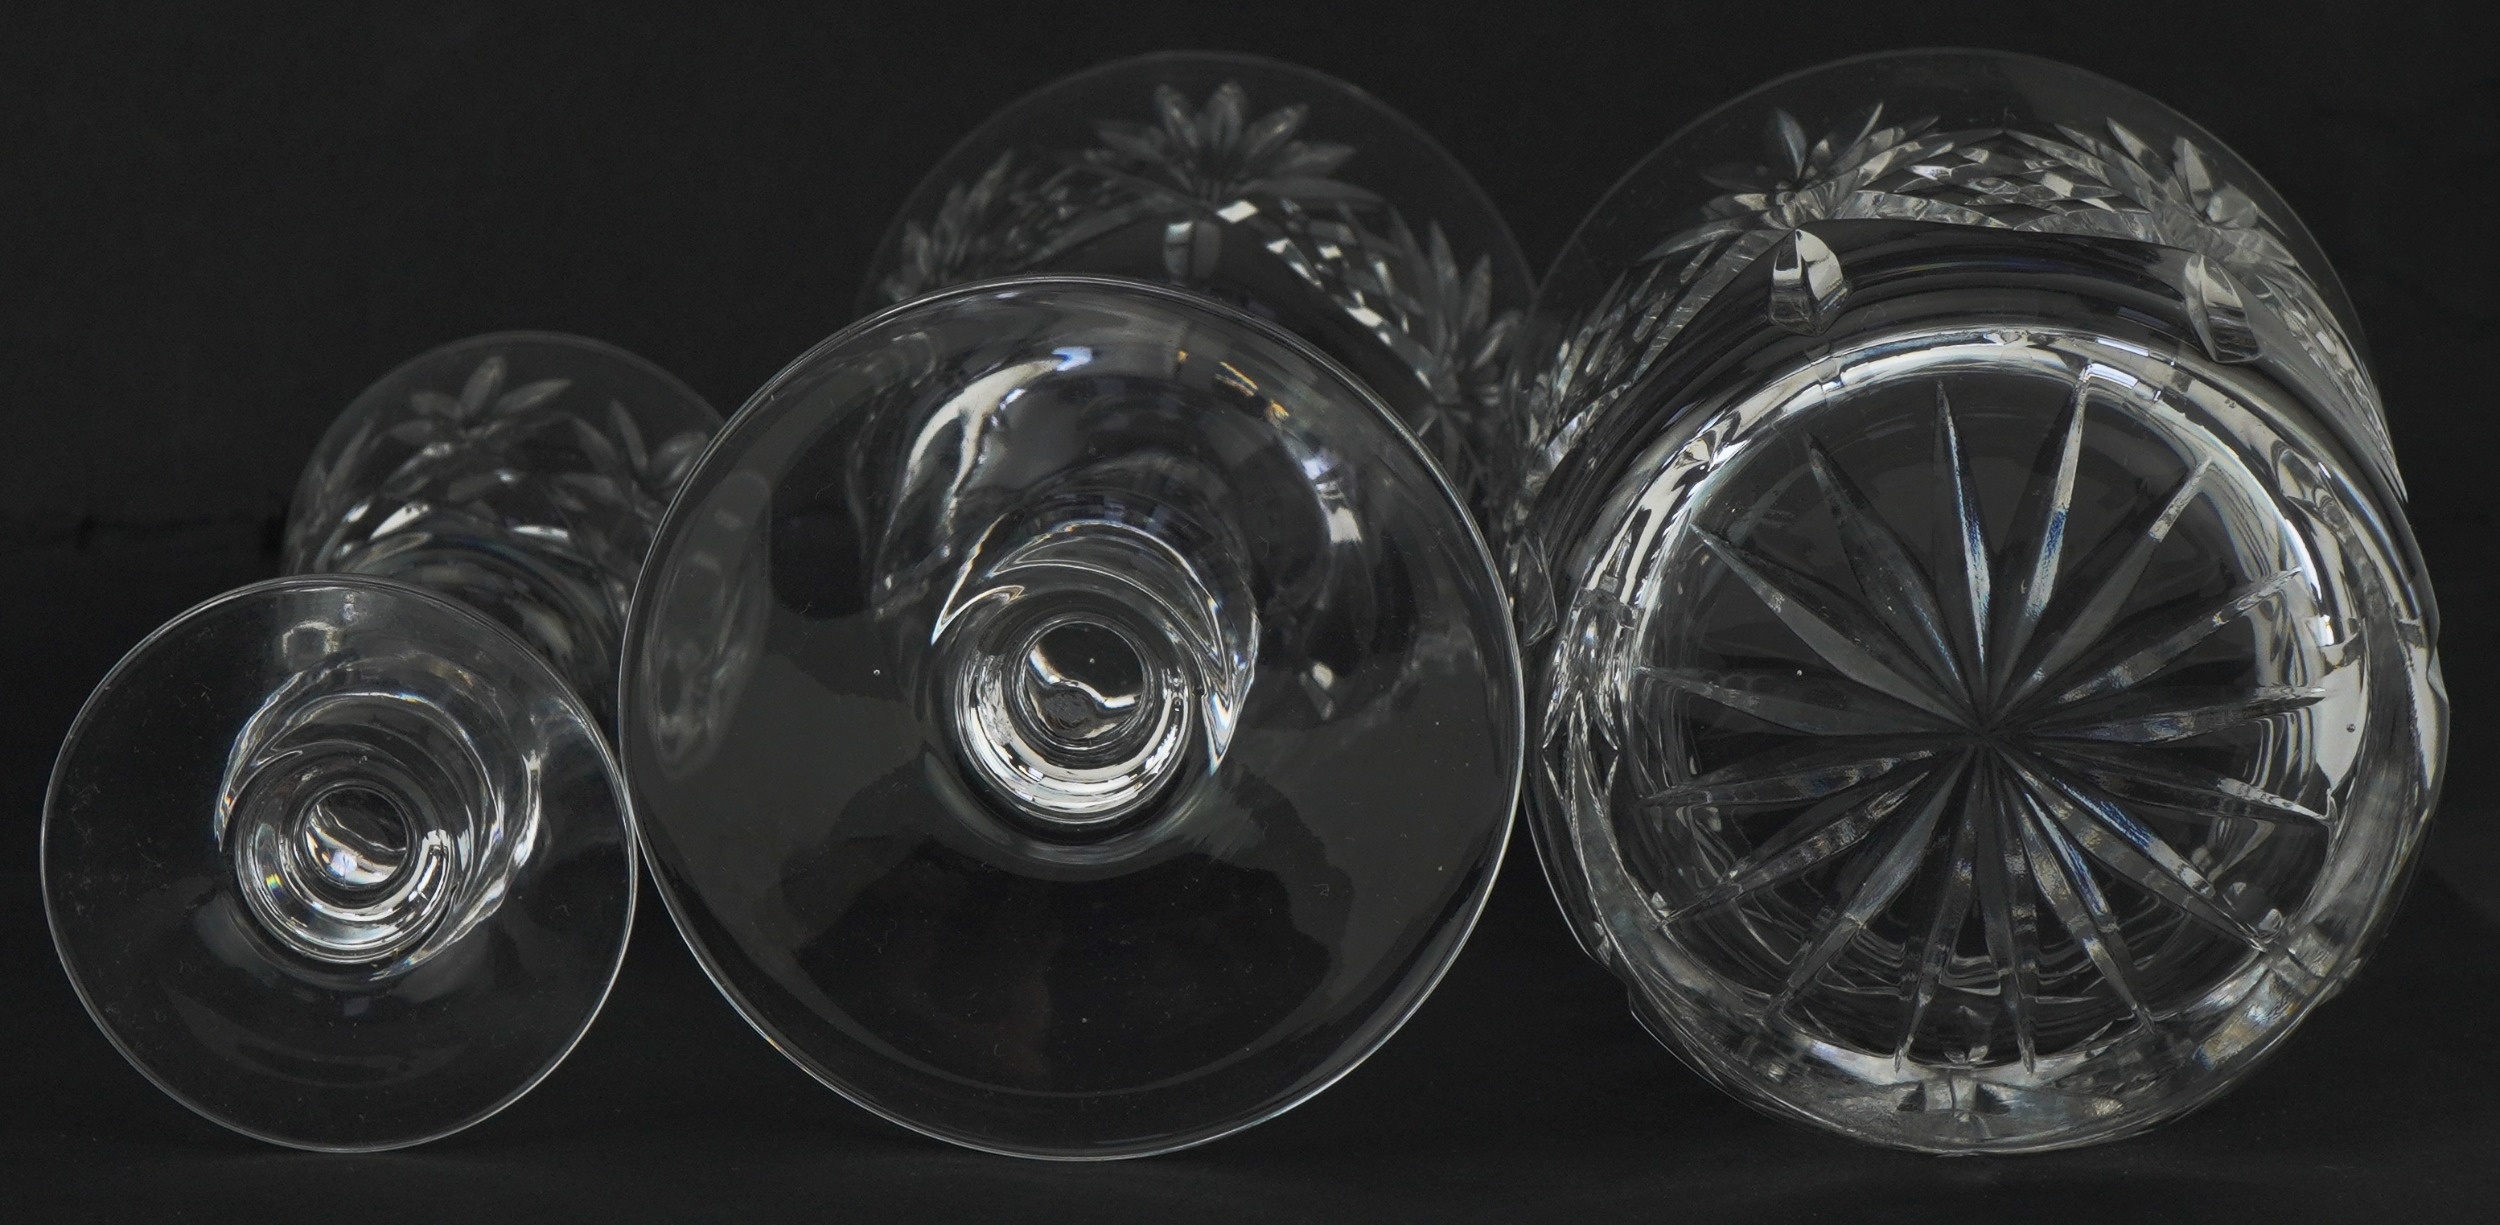 Edinburgh Crystal glassware boxed sets including set of six tumblers and set of six sherry glasses - Image 6 of 7